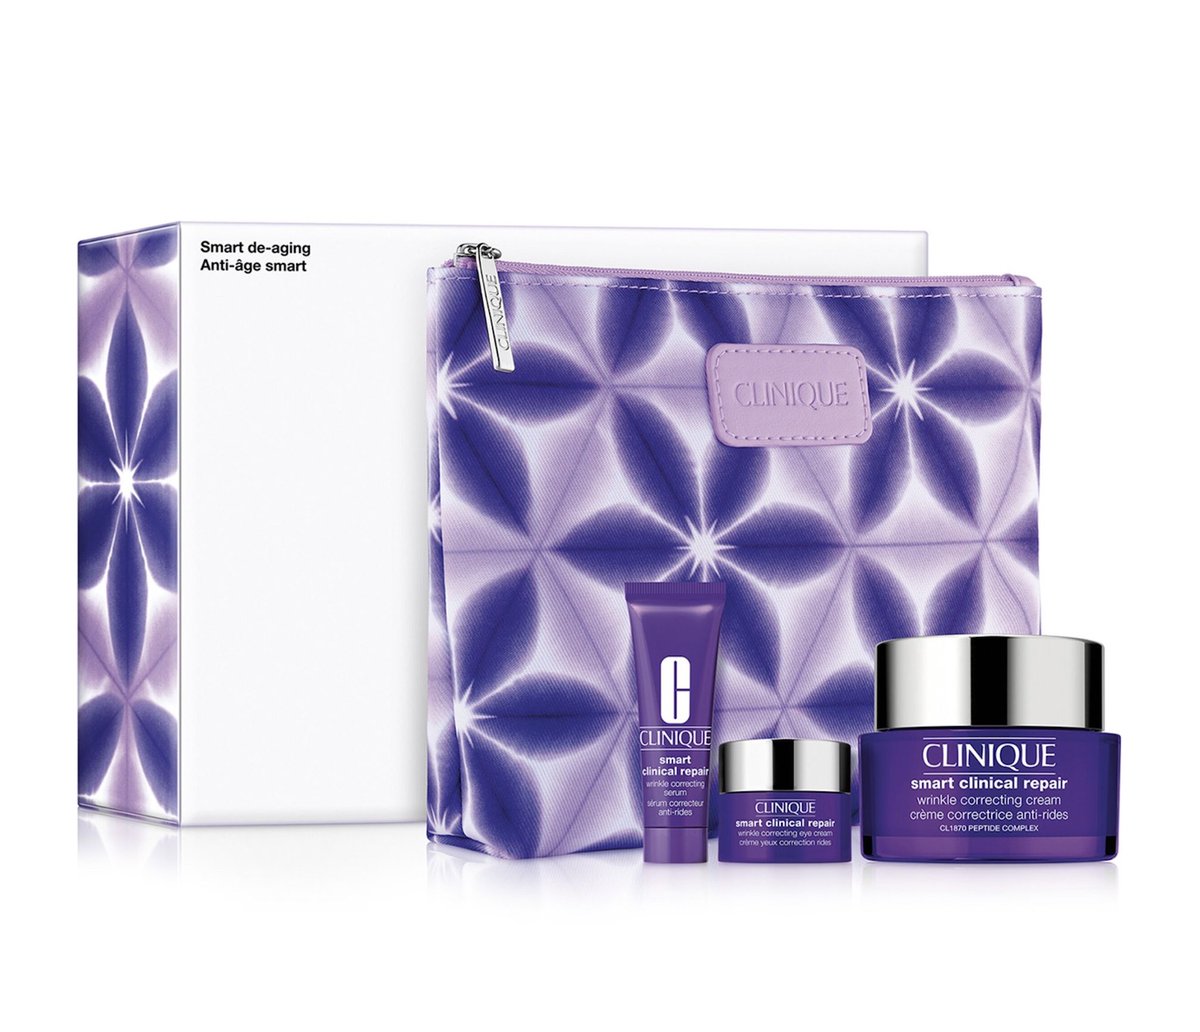 It's a surprise 'Happy Mother's Day' TwitterX Giveaway! I'm giving away this Clinique Smart Clinical Repair Gift Set on TwitterX. It contains the wrinkle-correcting cream, serum & eye cream. To enter, follow @davelackie & RT #win (ends 05/12)